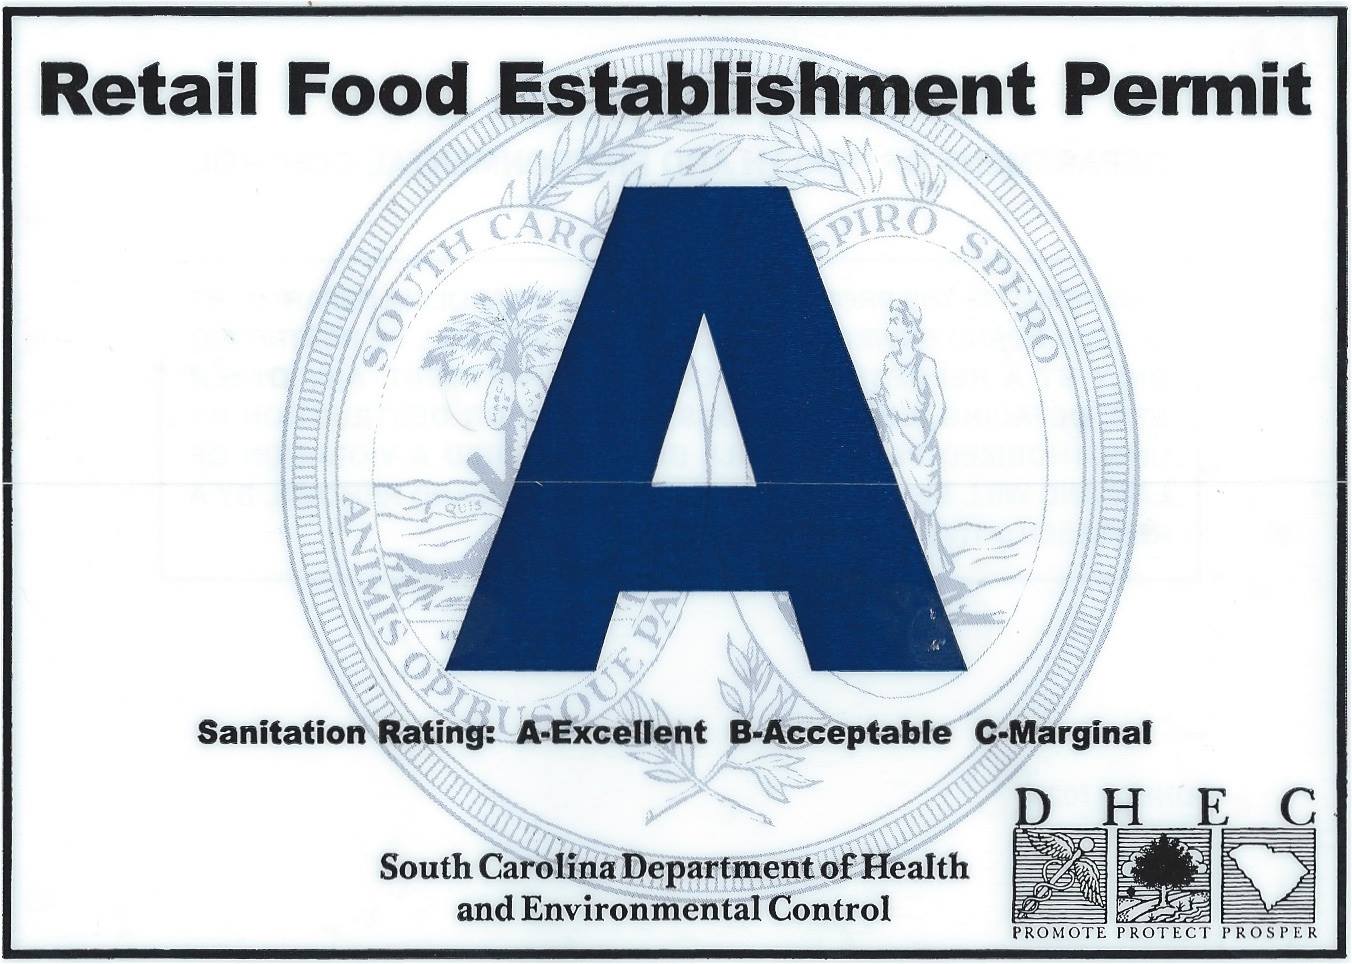 100% score from the SC Health Department Inspection (DHEC)